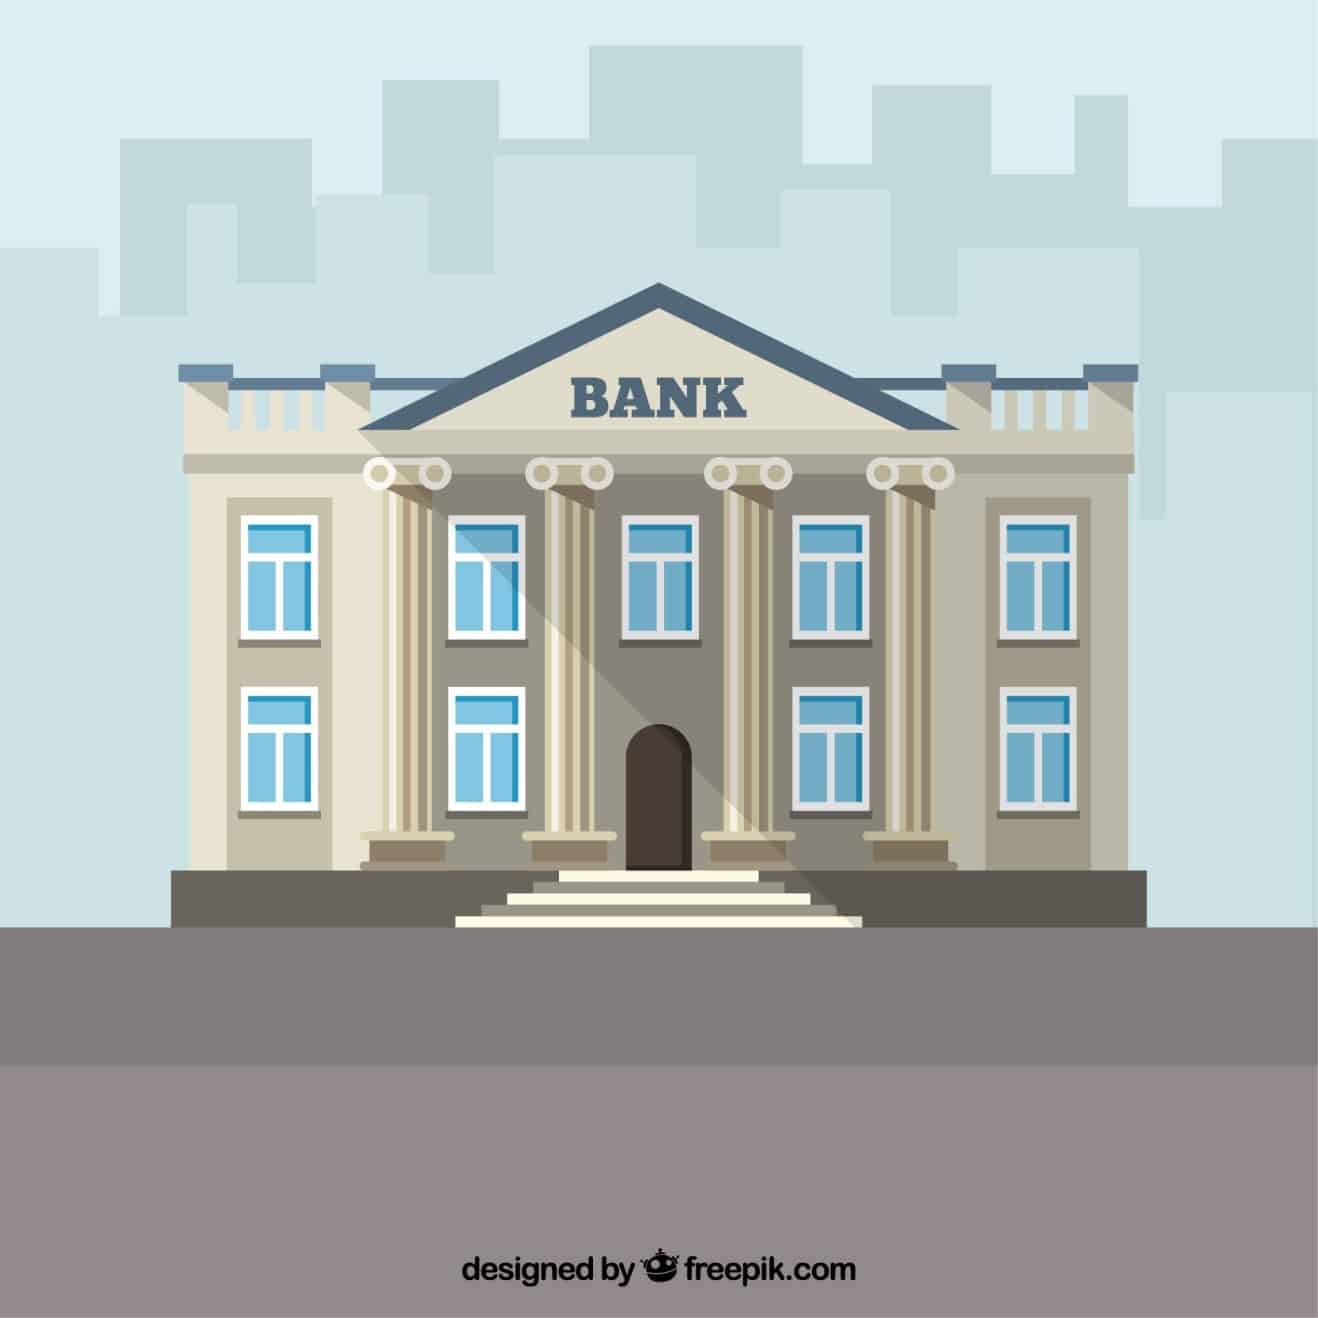 Banking Made Easy in the Modern Era